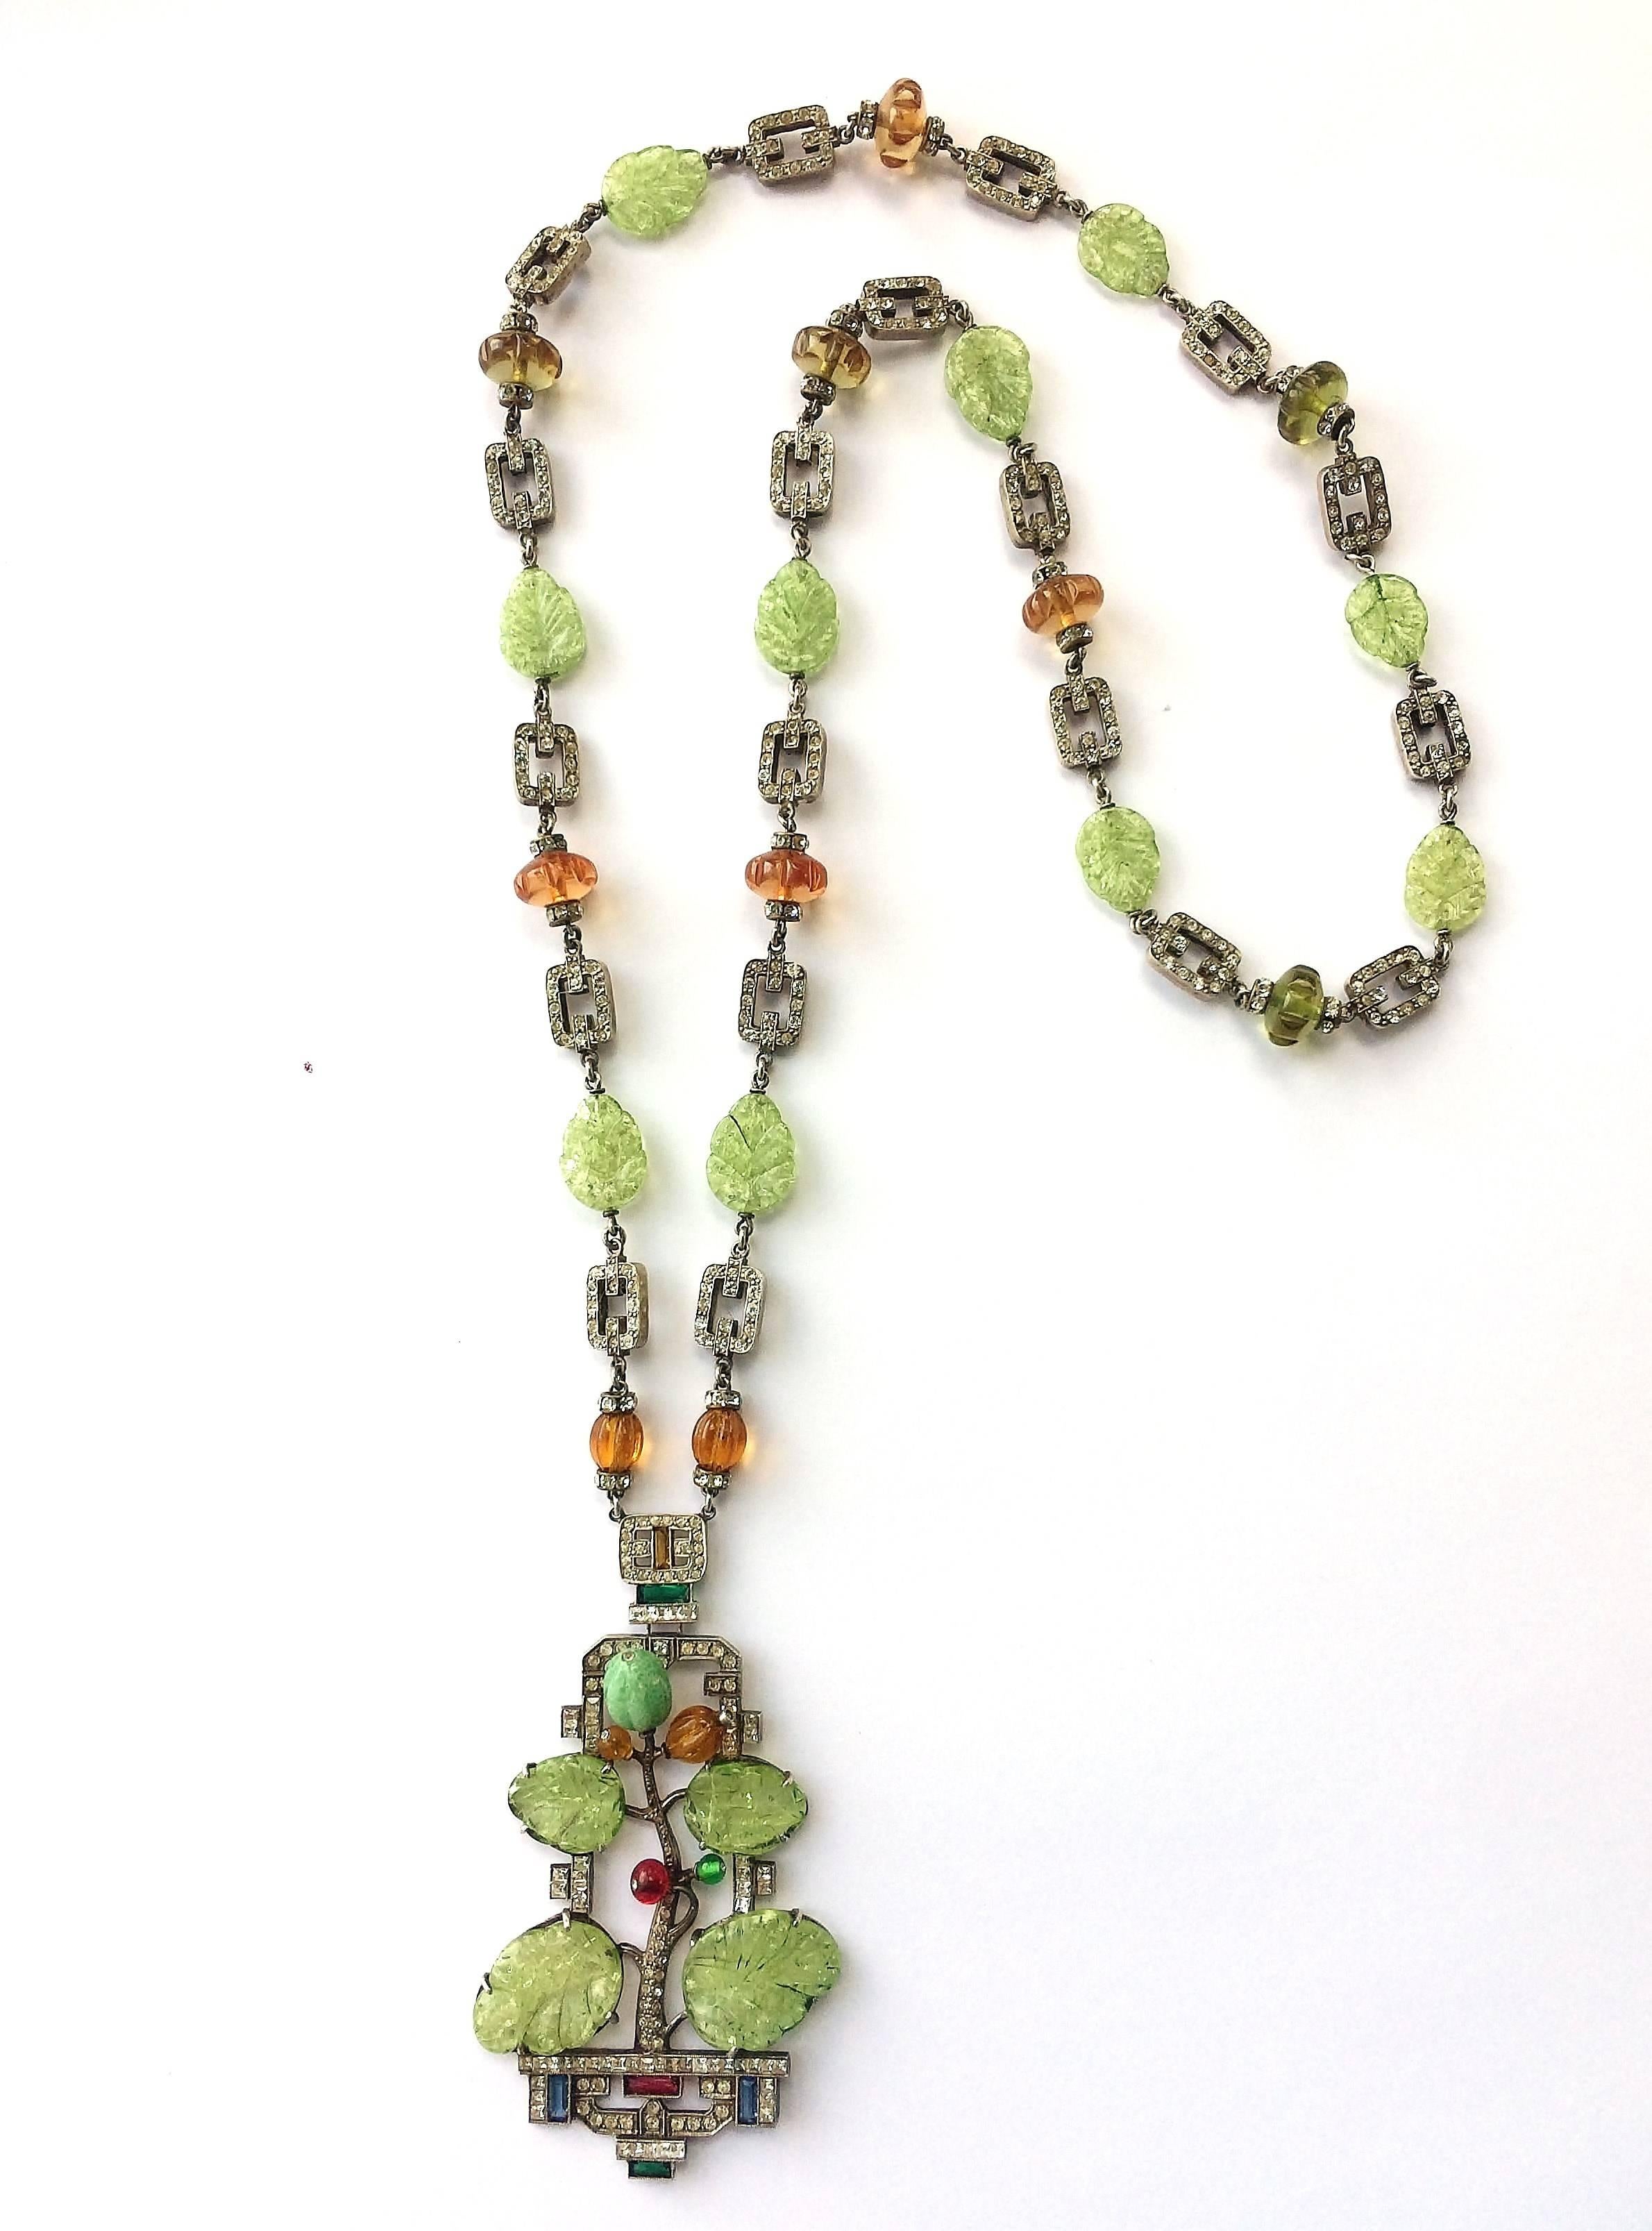 A fabulous and very long sautoir pendant necklace, whose chain is composed of double sided soft rectangular set in sliver with pastes, interspersed with melon cut topaz and peach beads and moulded glass light green 'leaves'. The dynamic pendant is